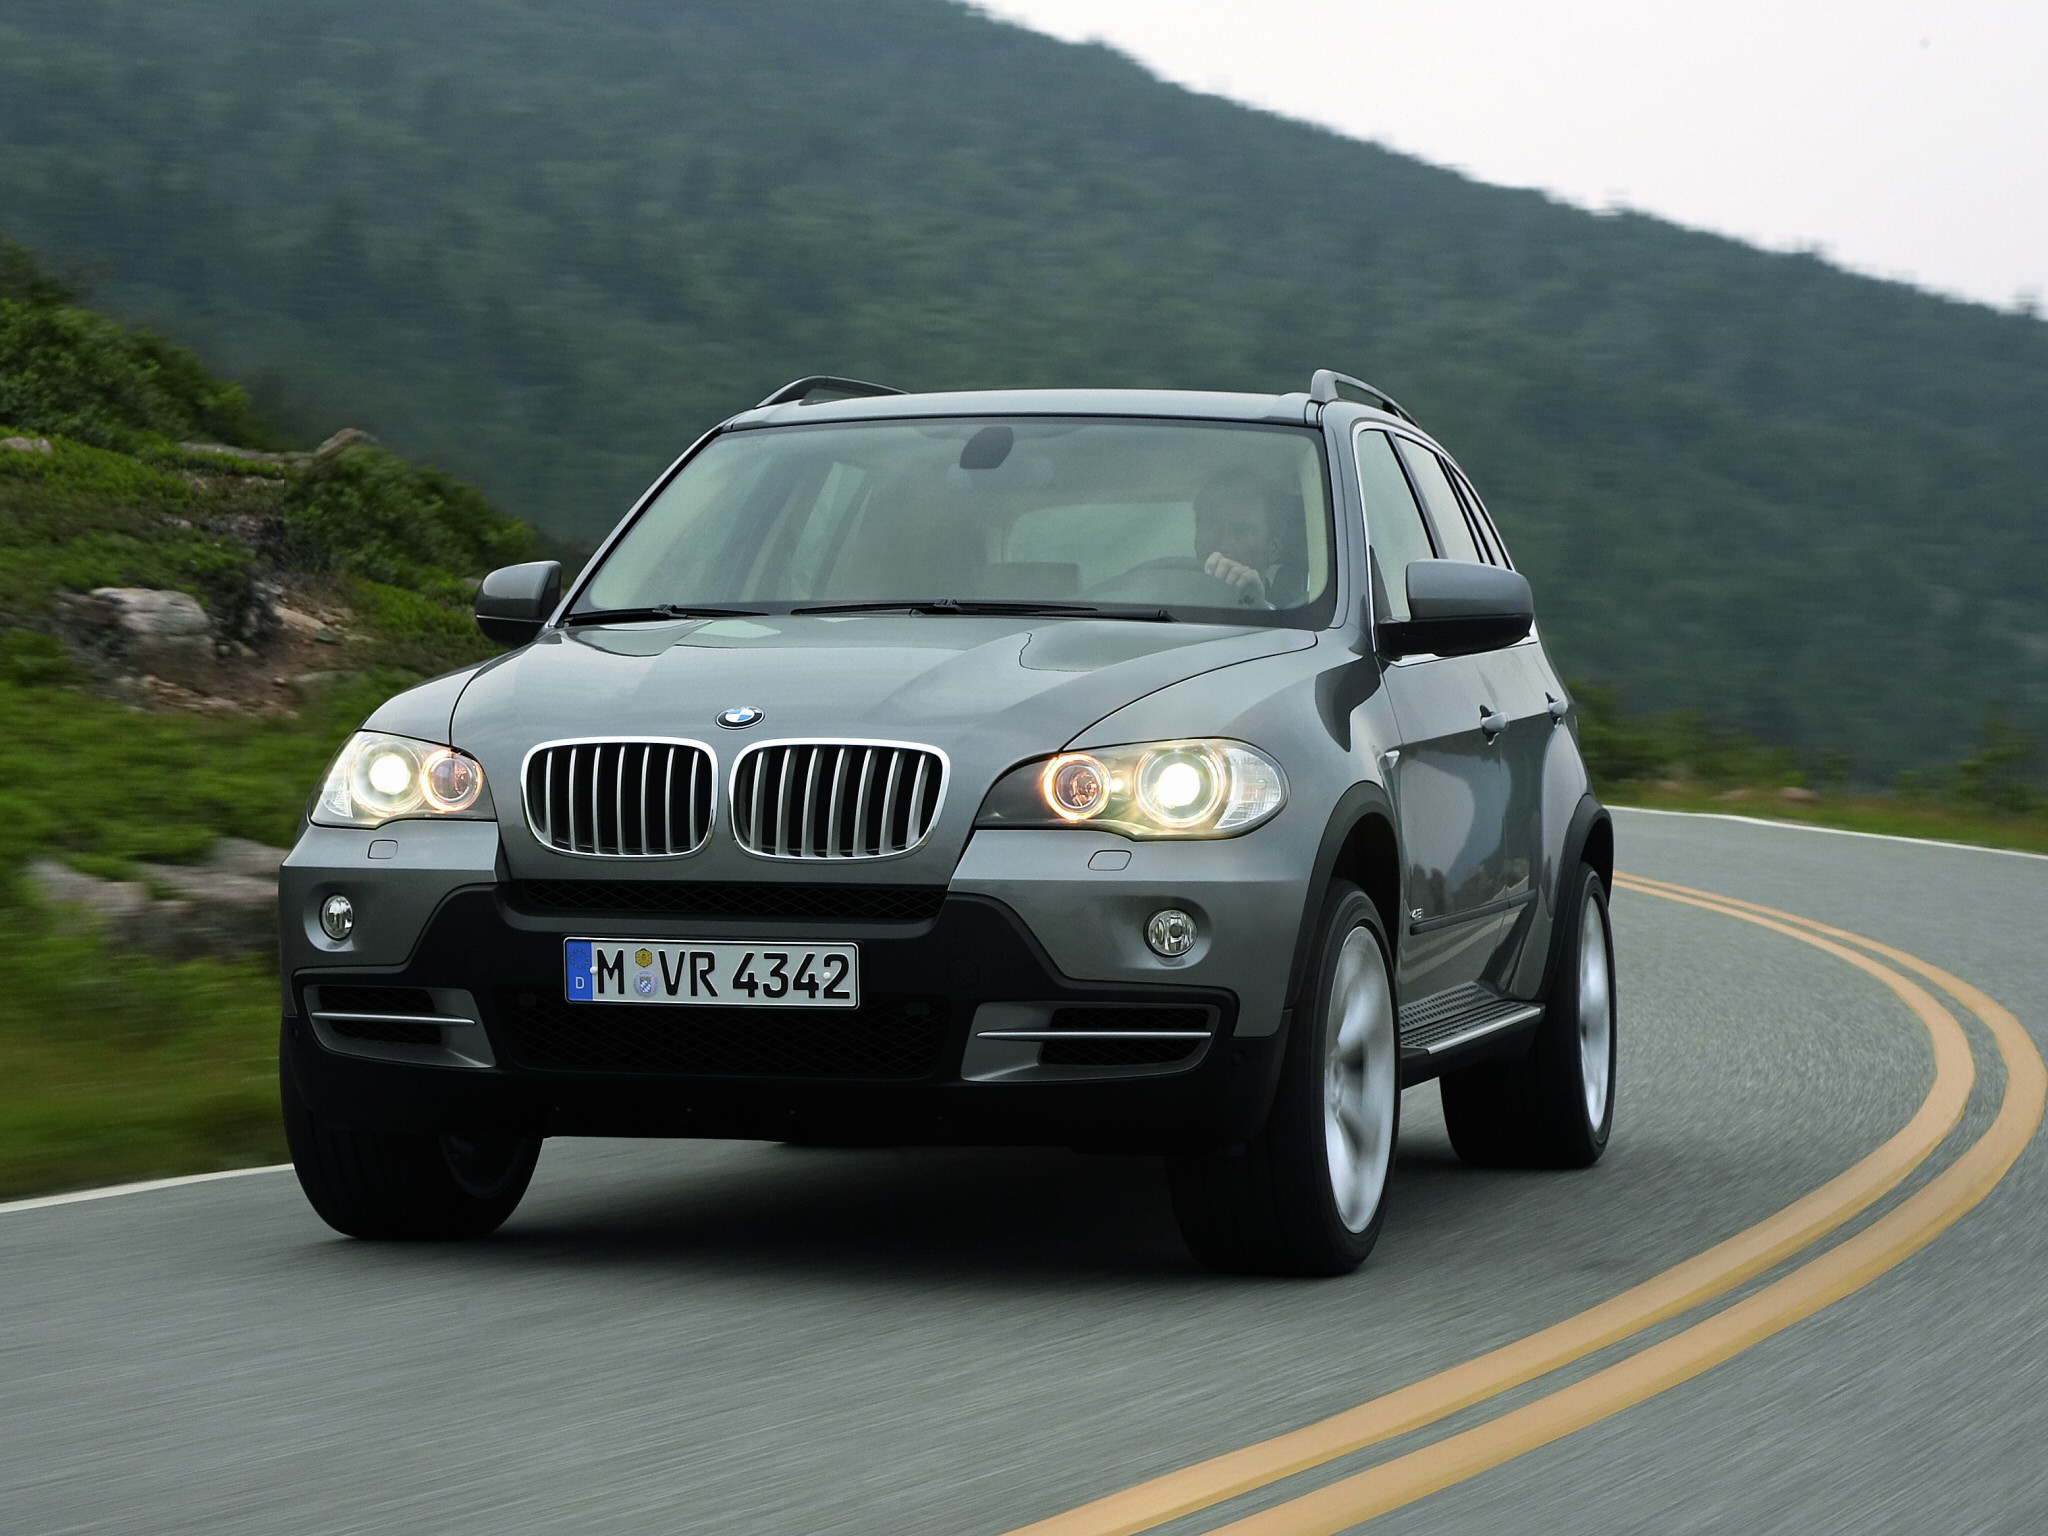 Car in pictures car photo gallery 187 BMW X5 2006 Photo 10